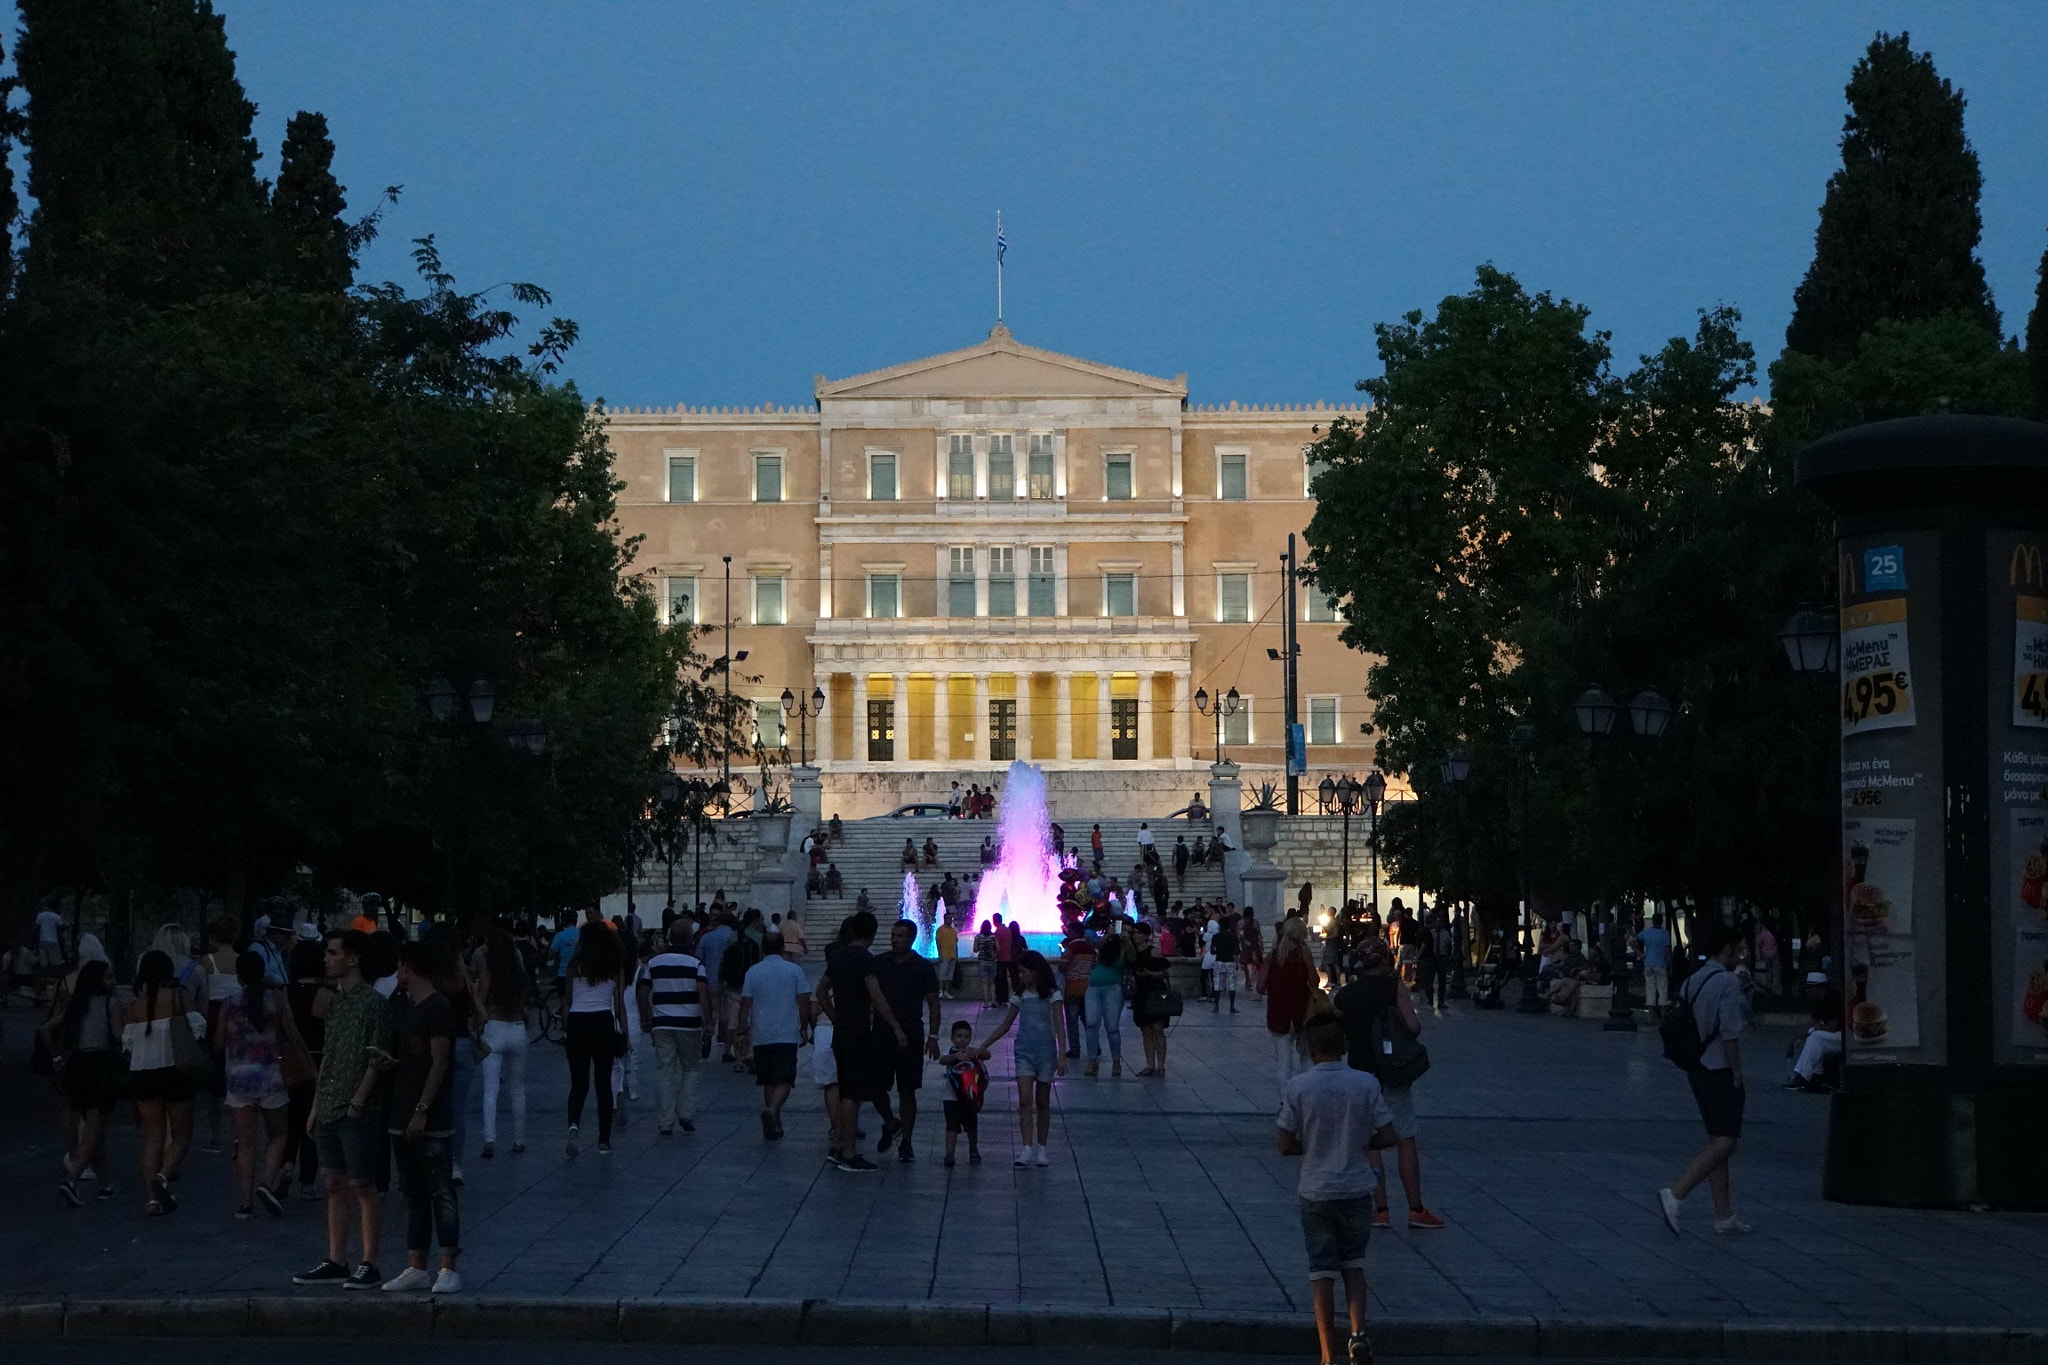 Sony a6300 sample photo. Greek parliament photography